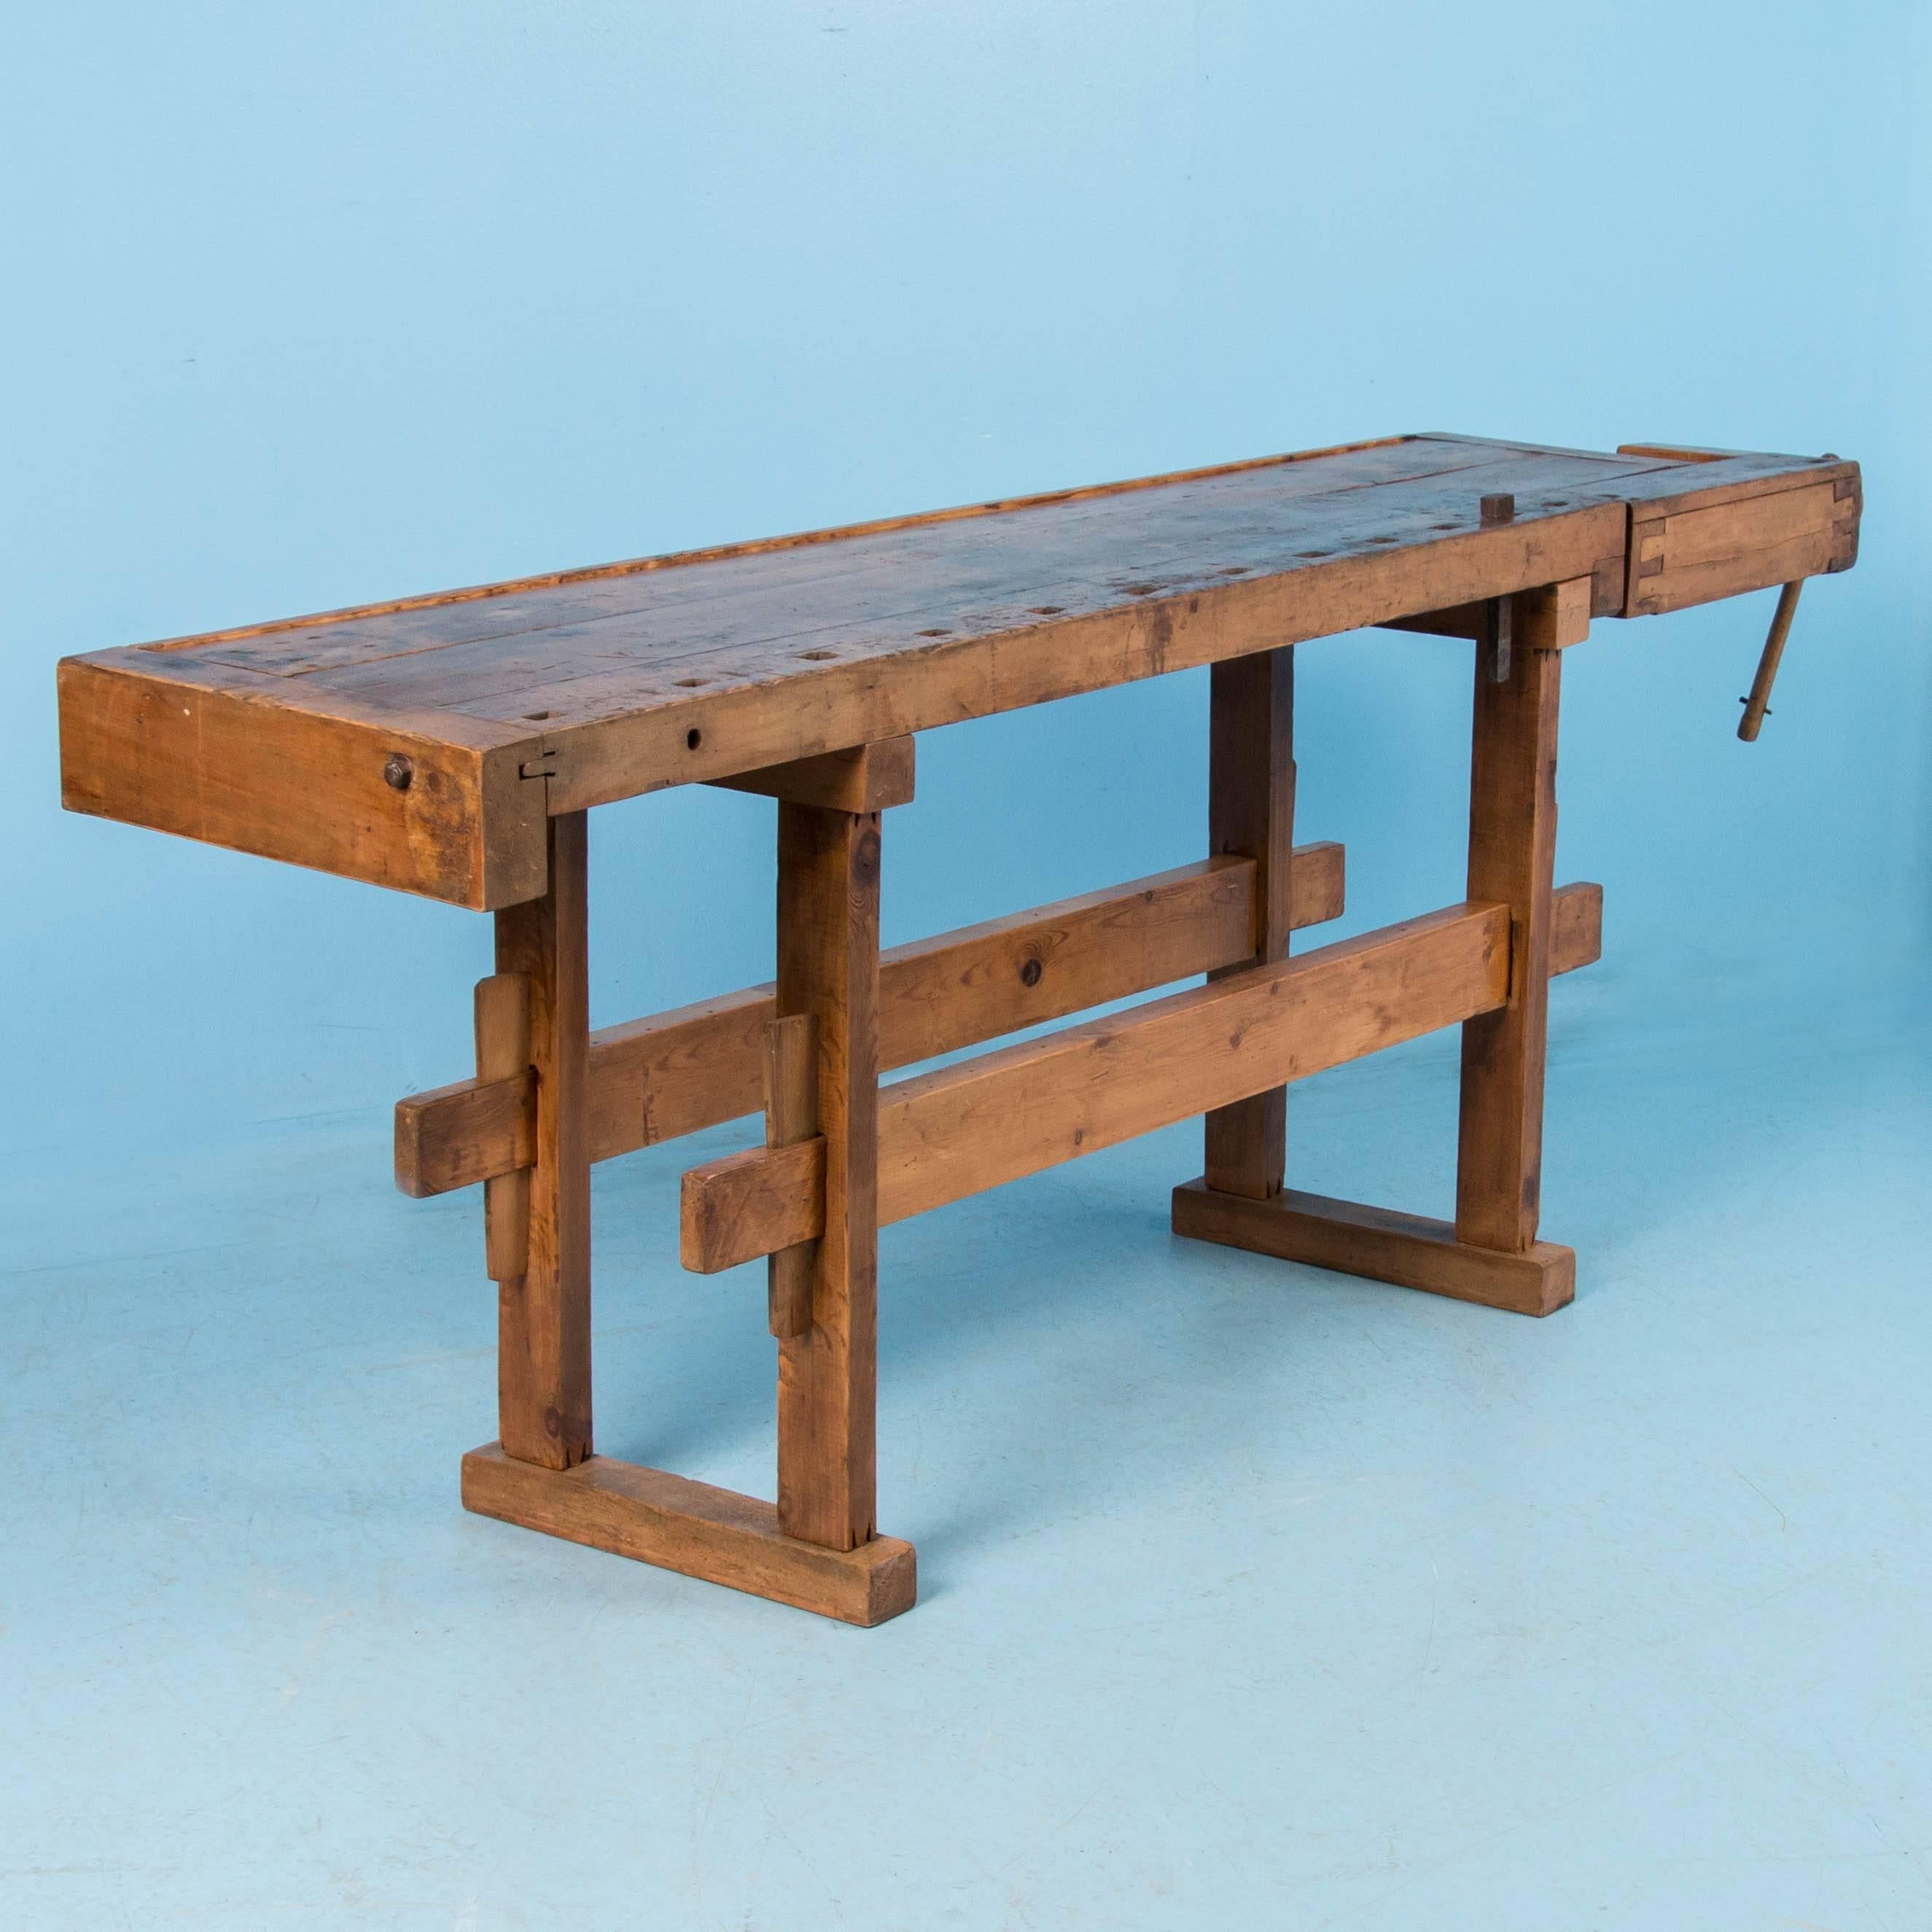 Beautiful antique carpenters’ workbench circa 1890, bearing an incredible patina after years of traditional use. It has a single wood handled vice with continuous narrow tabletop and comes with a traditional trestle base that allows it to be